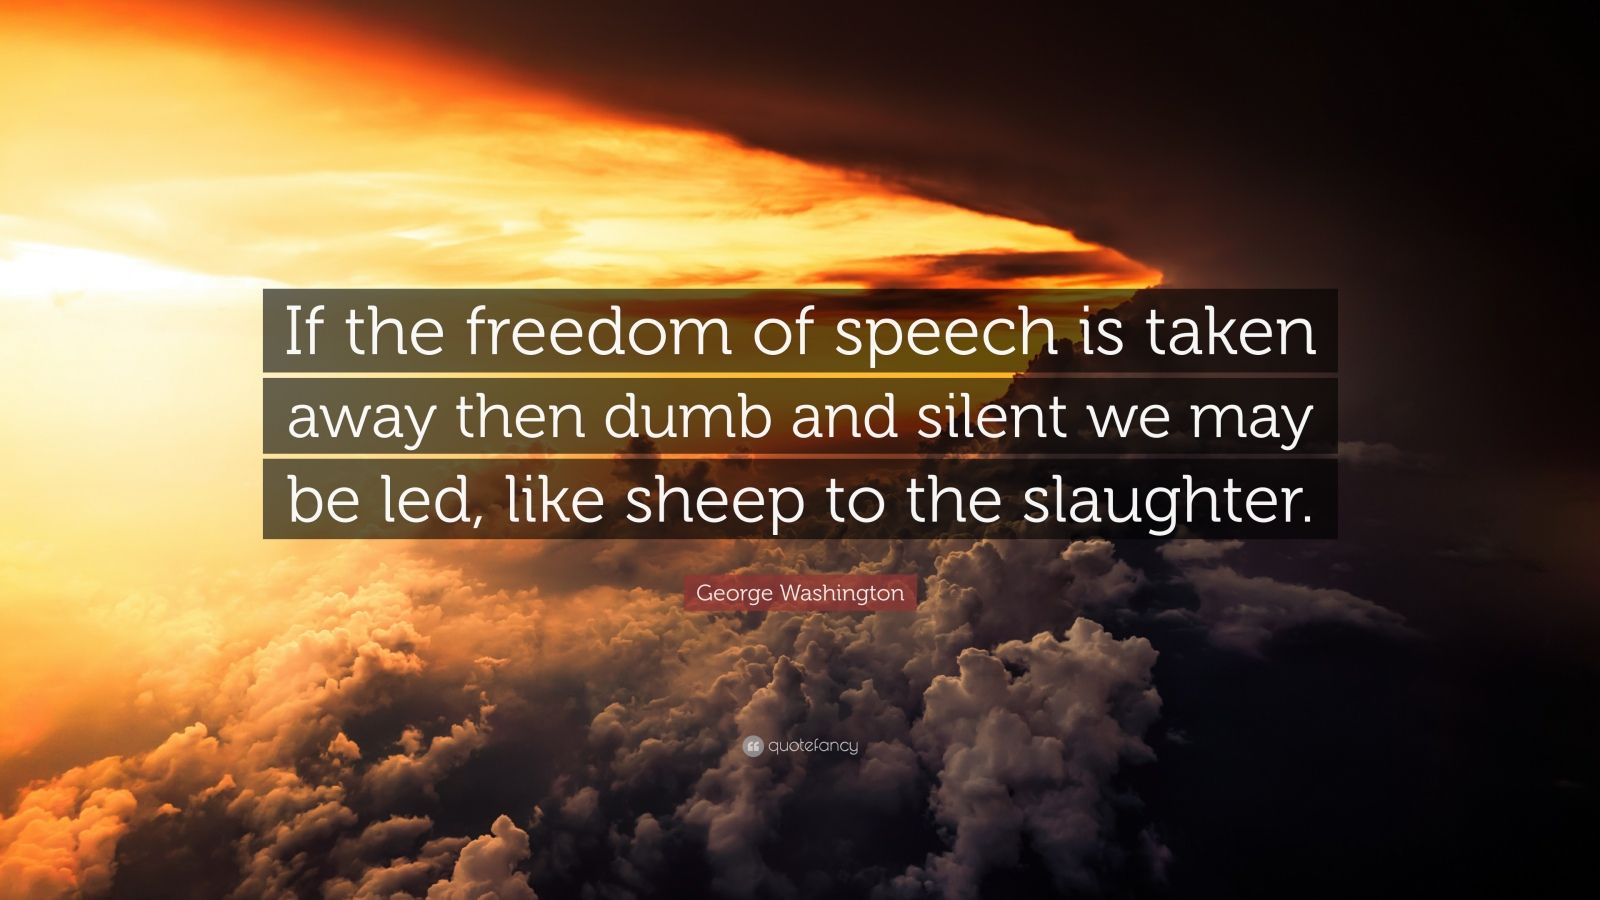 George Washington Quote: “If the freedom of speech is taken away then